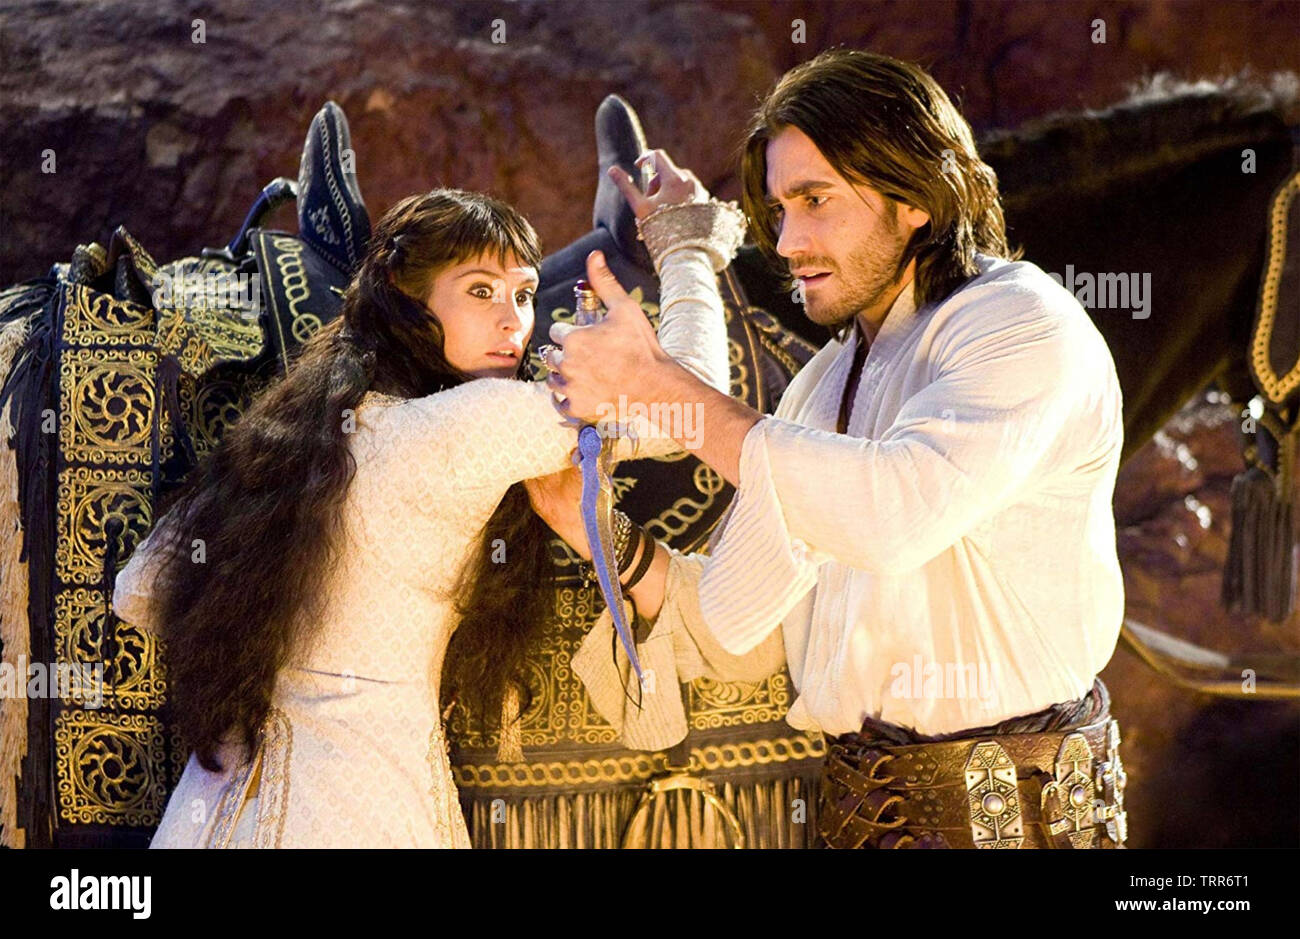 PRINCE OF PERSIA: THE SANDS OF TIME 2010  Walt Disney Pictures film with Jake Gyllenhaal and Gemma Arteton Stock Photo